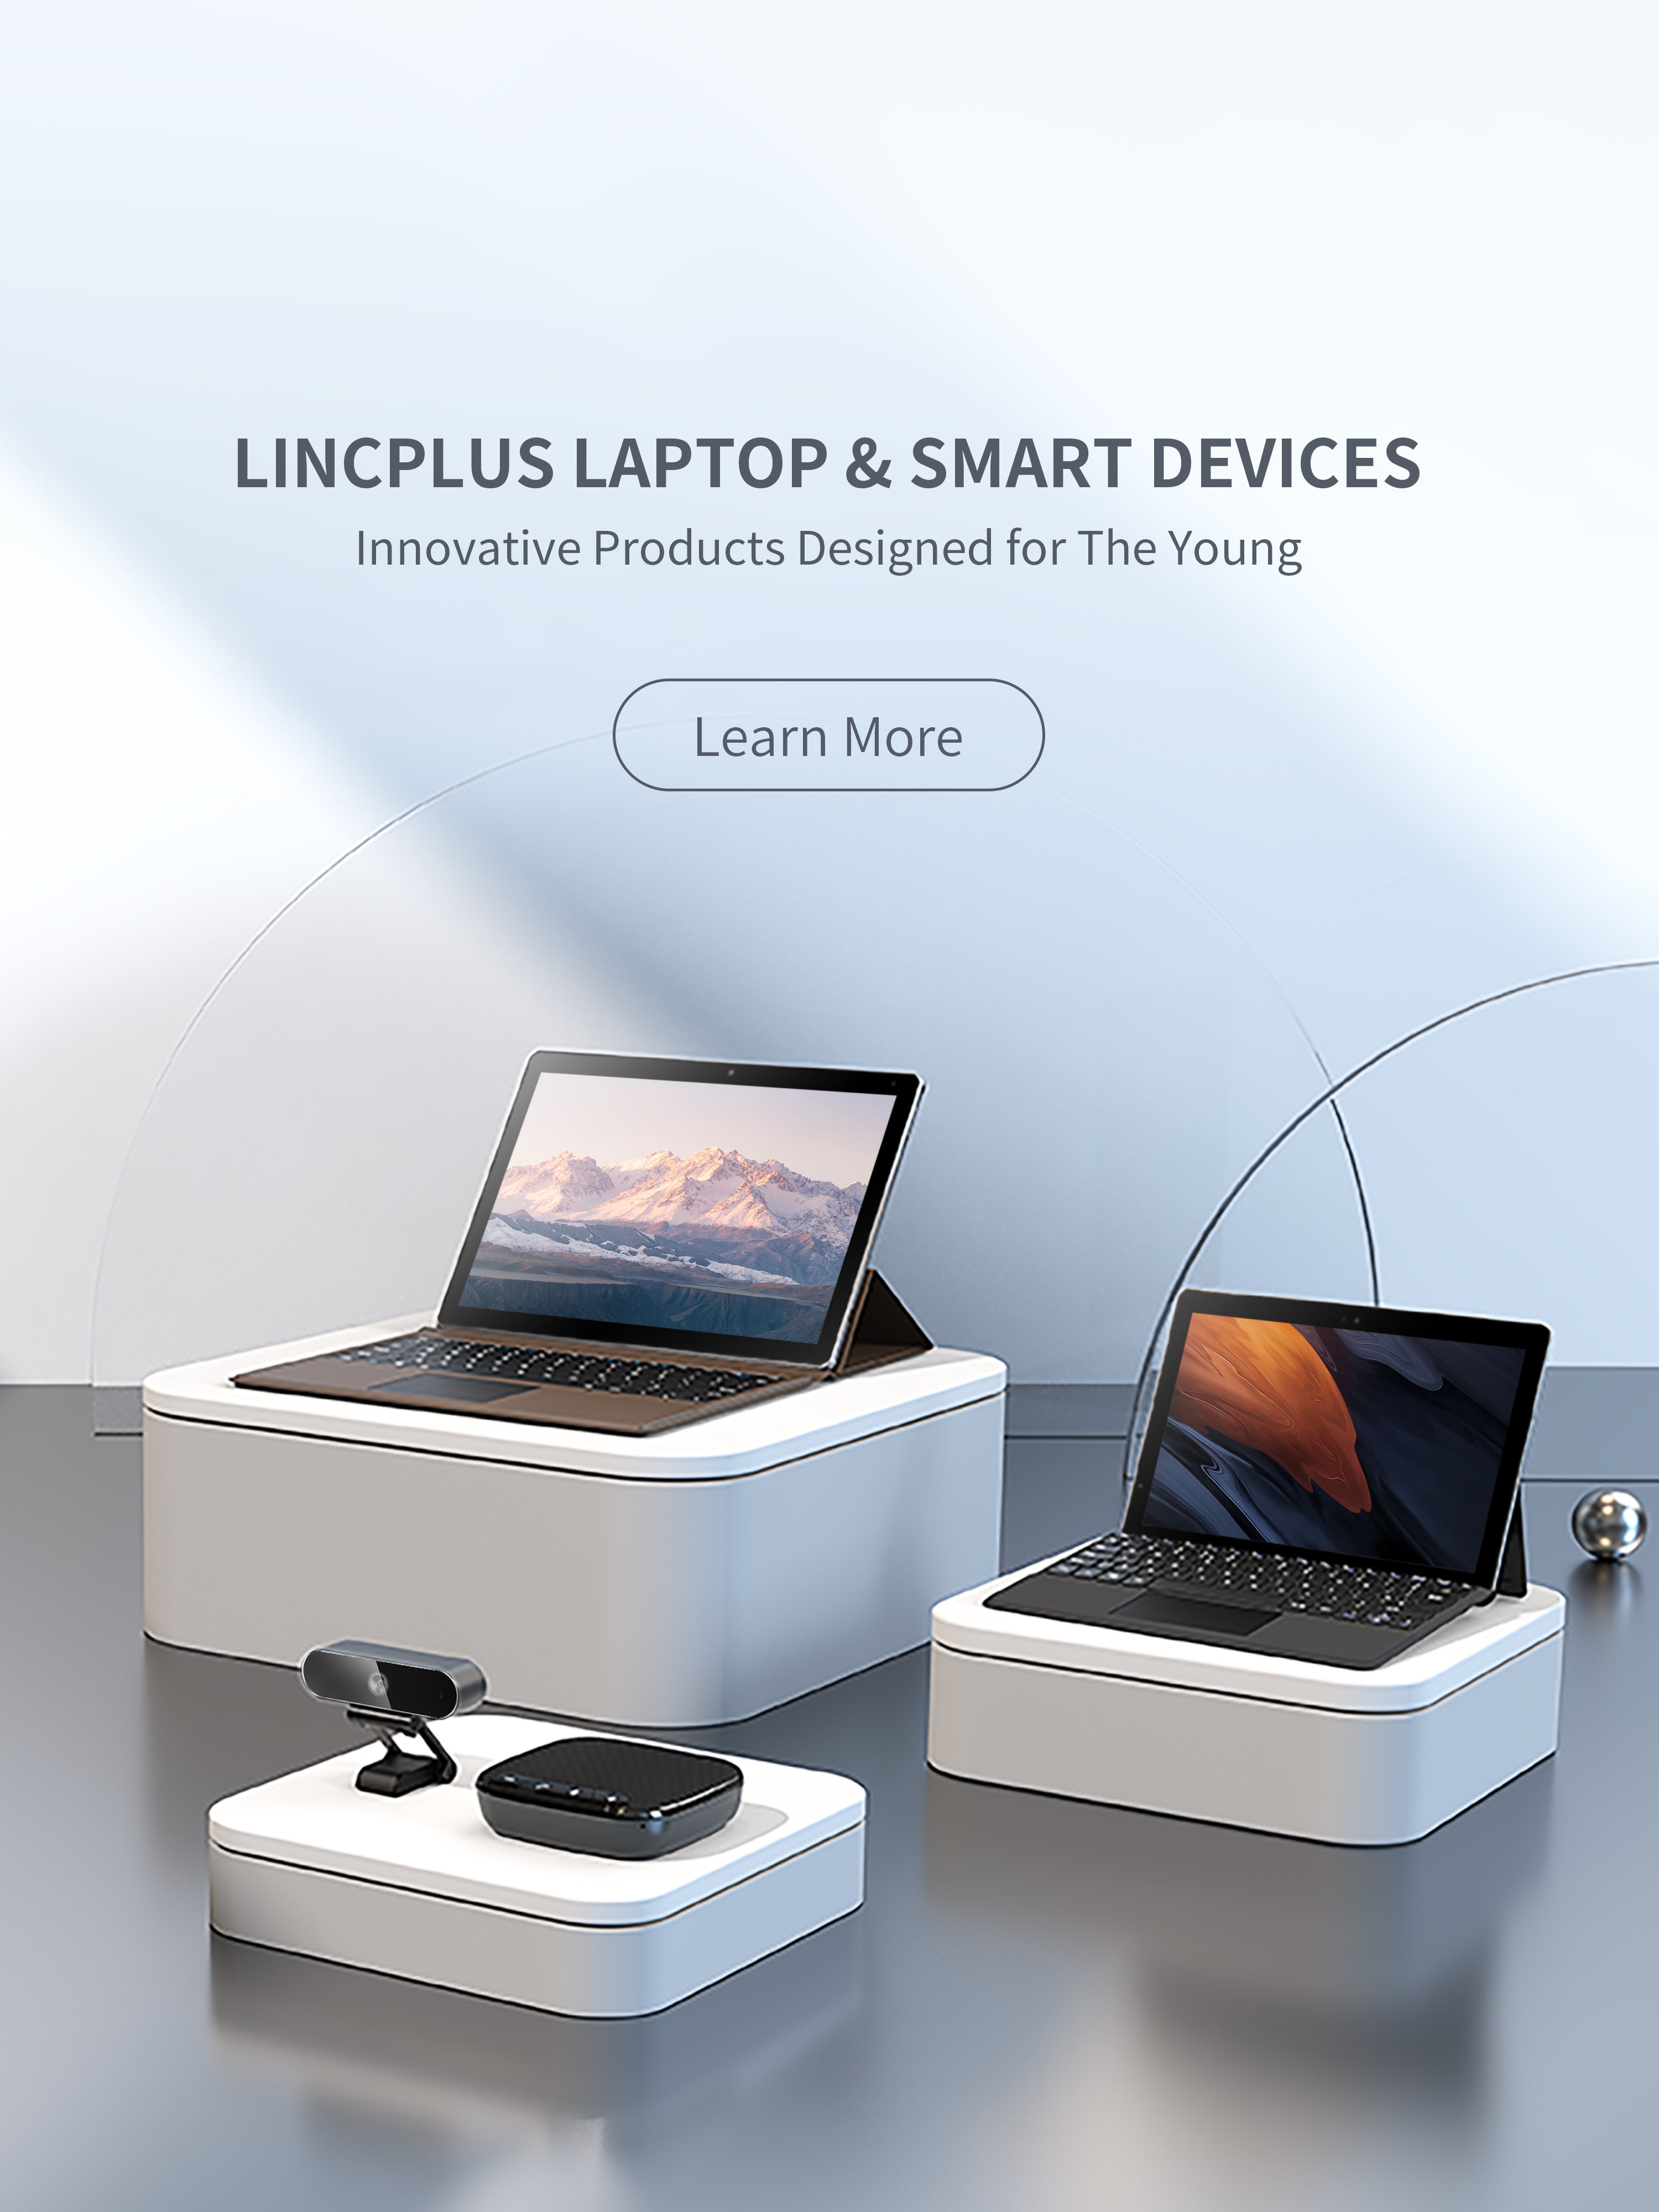 lincplus laptop, tablet and smart devices for the young